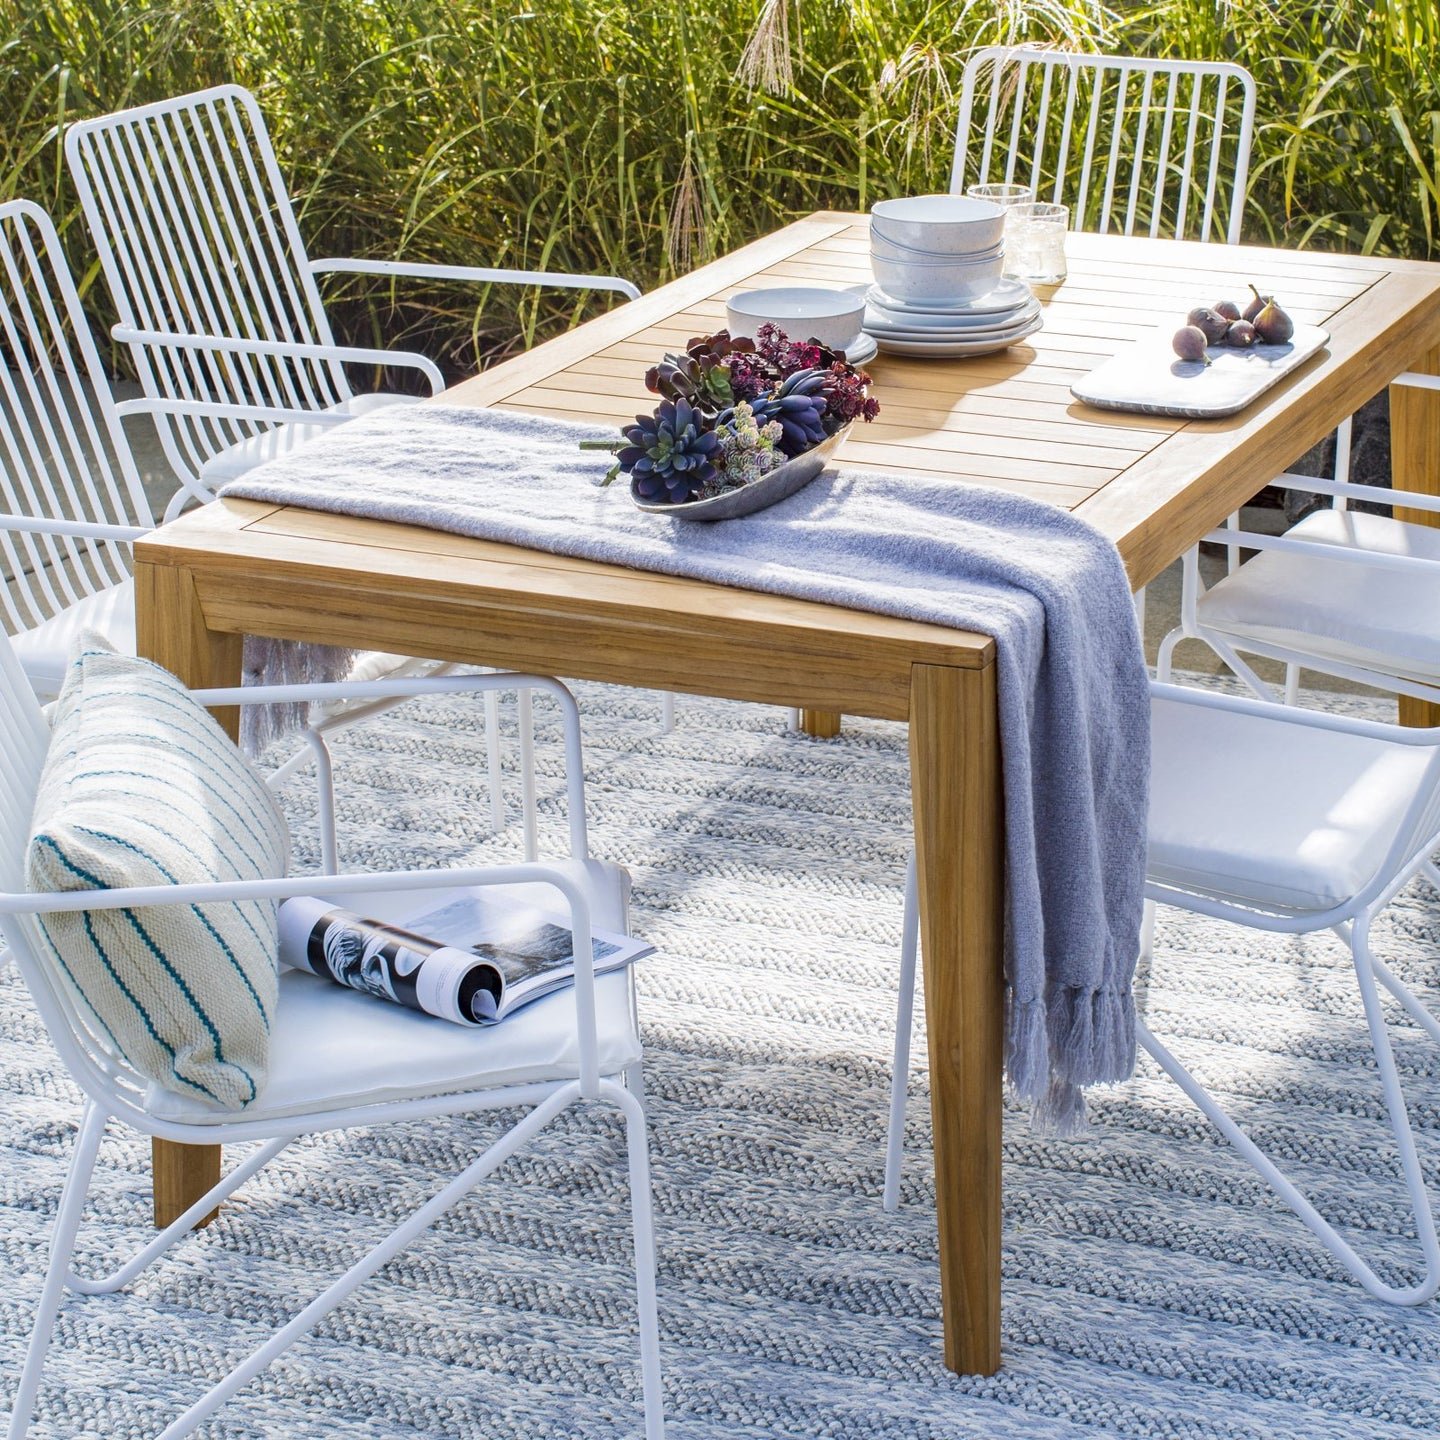 We’ve Got Your Outdoor Entertaining Cheat Sheet Right Here